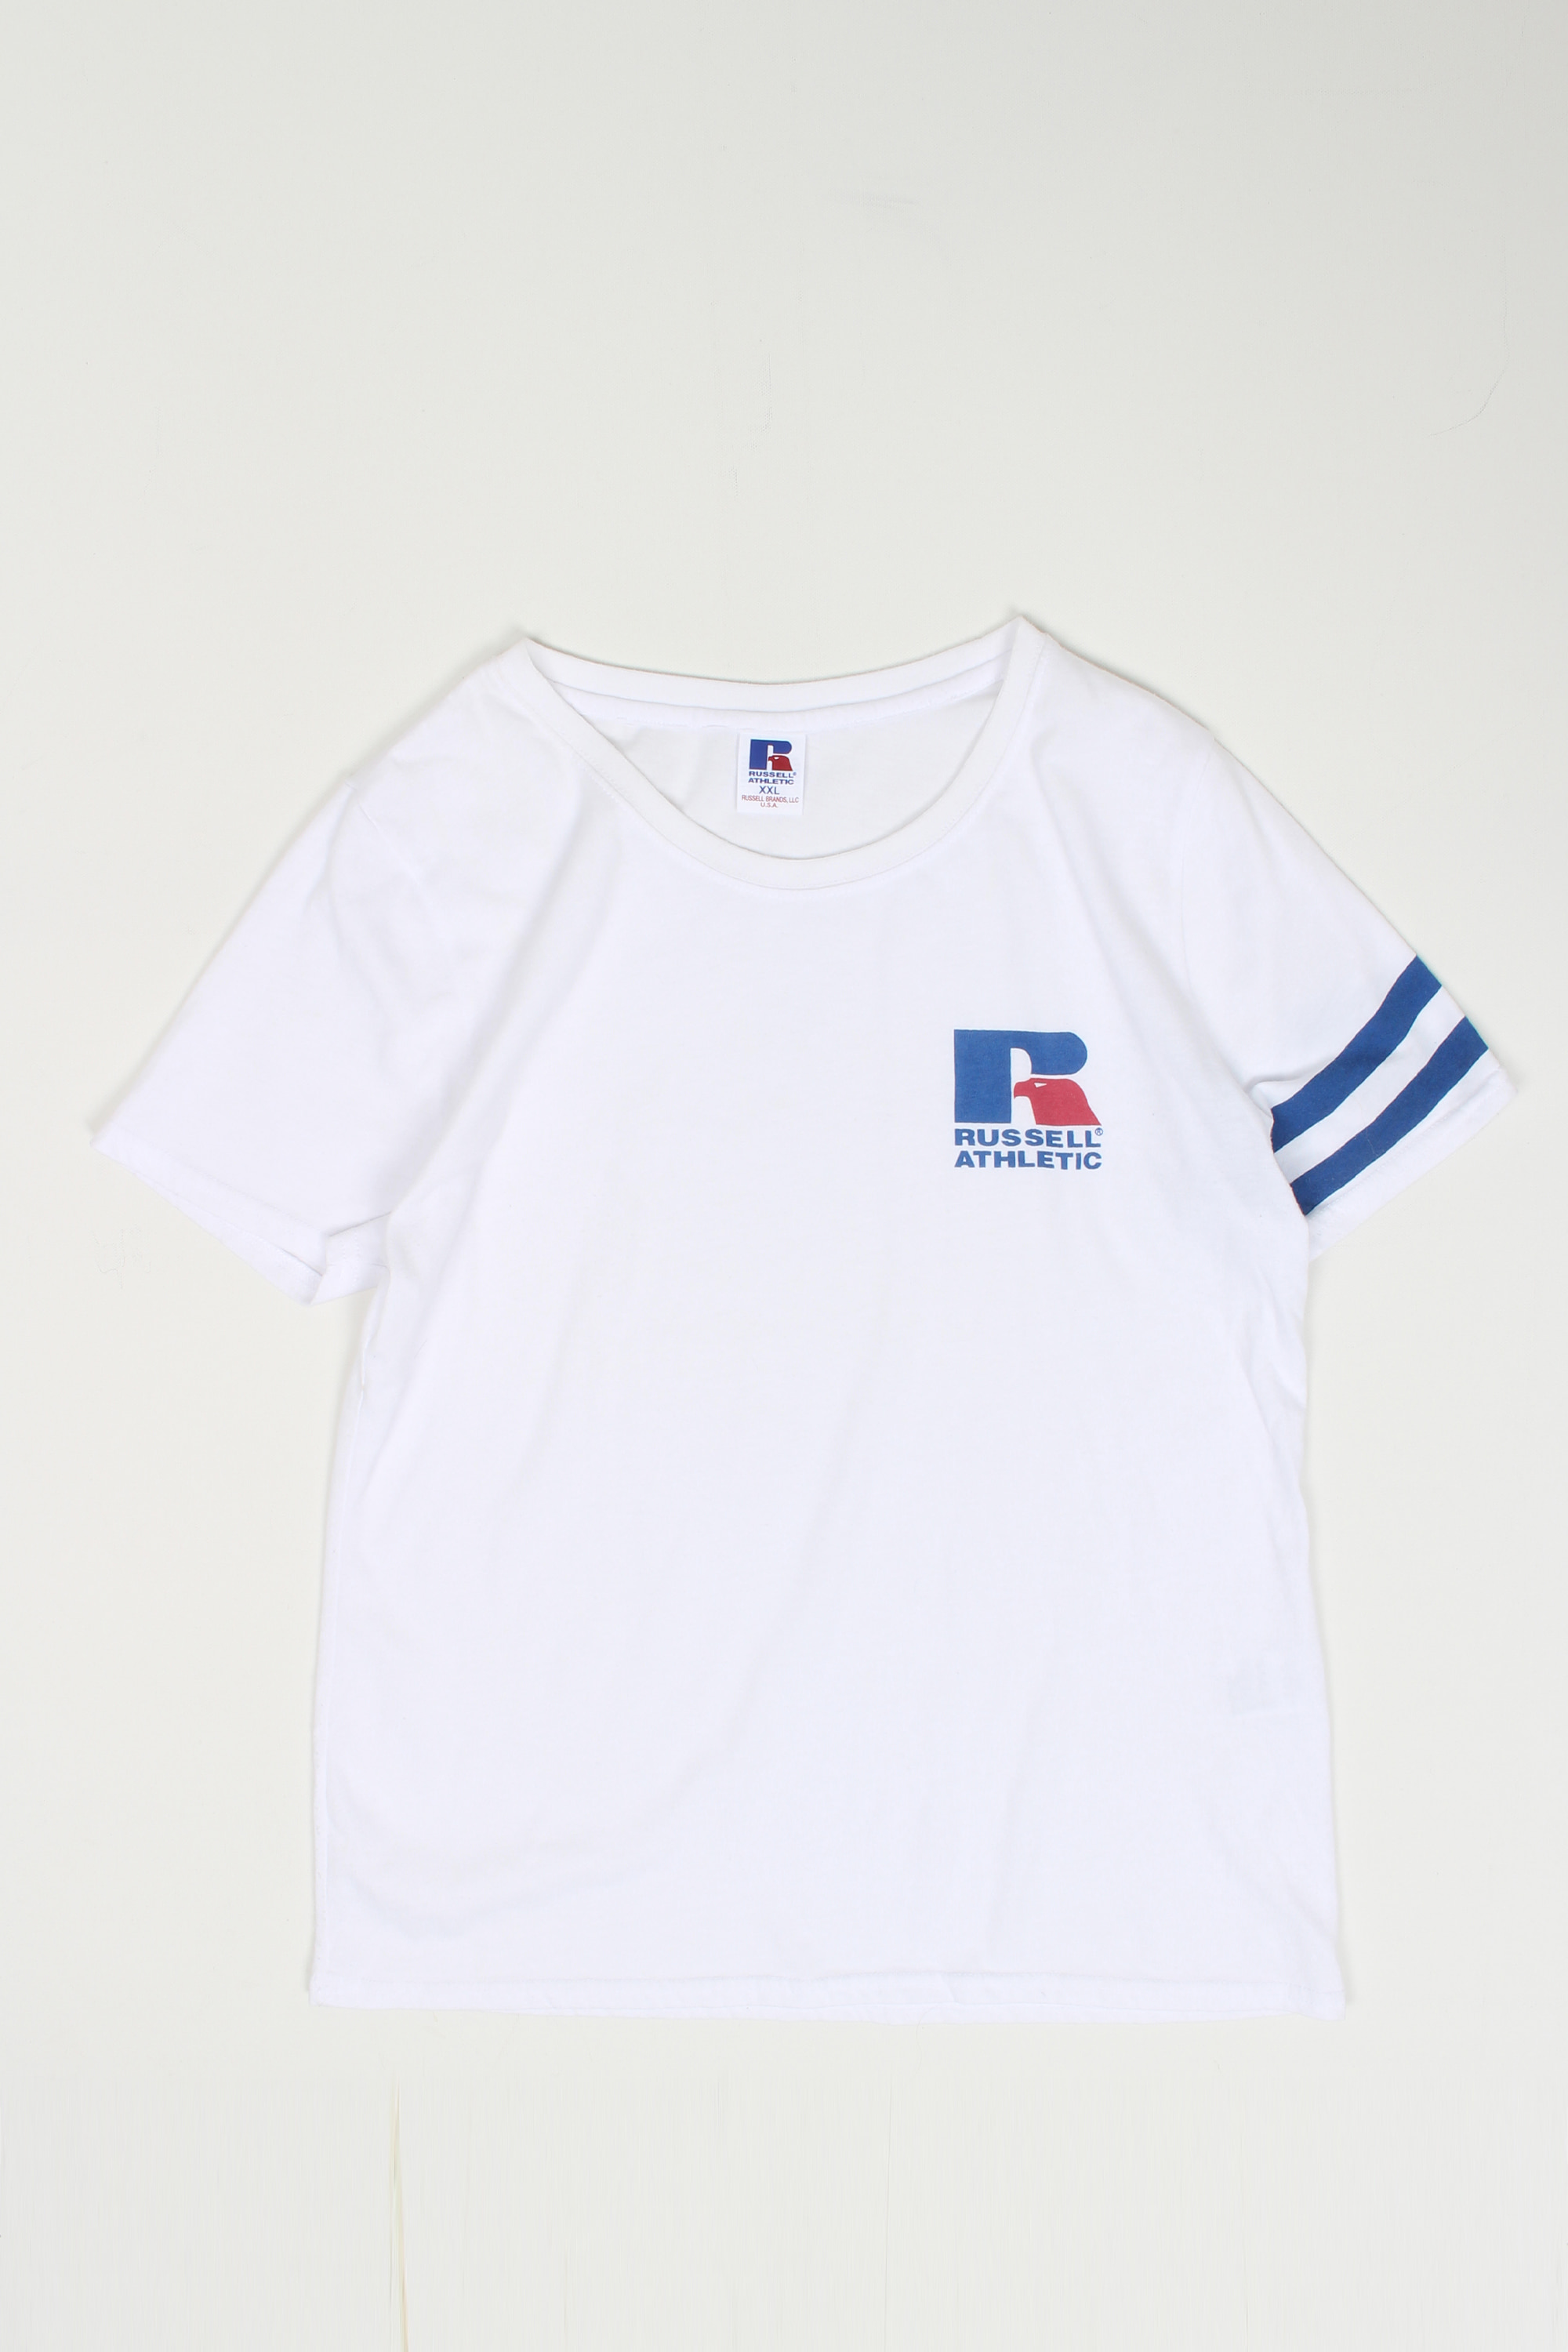 RUSSELL ATHLETIC Logo Tee